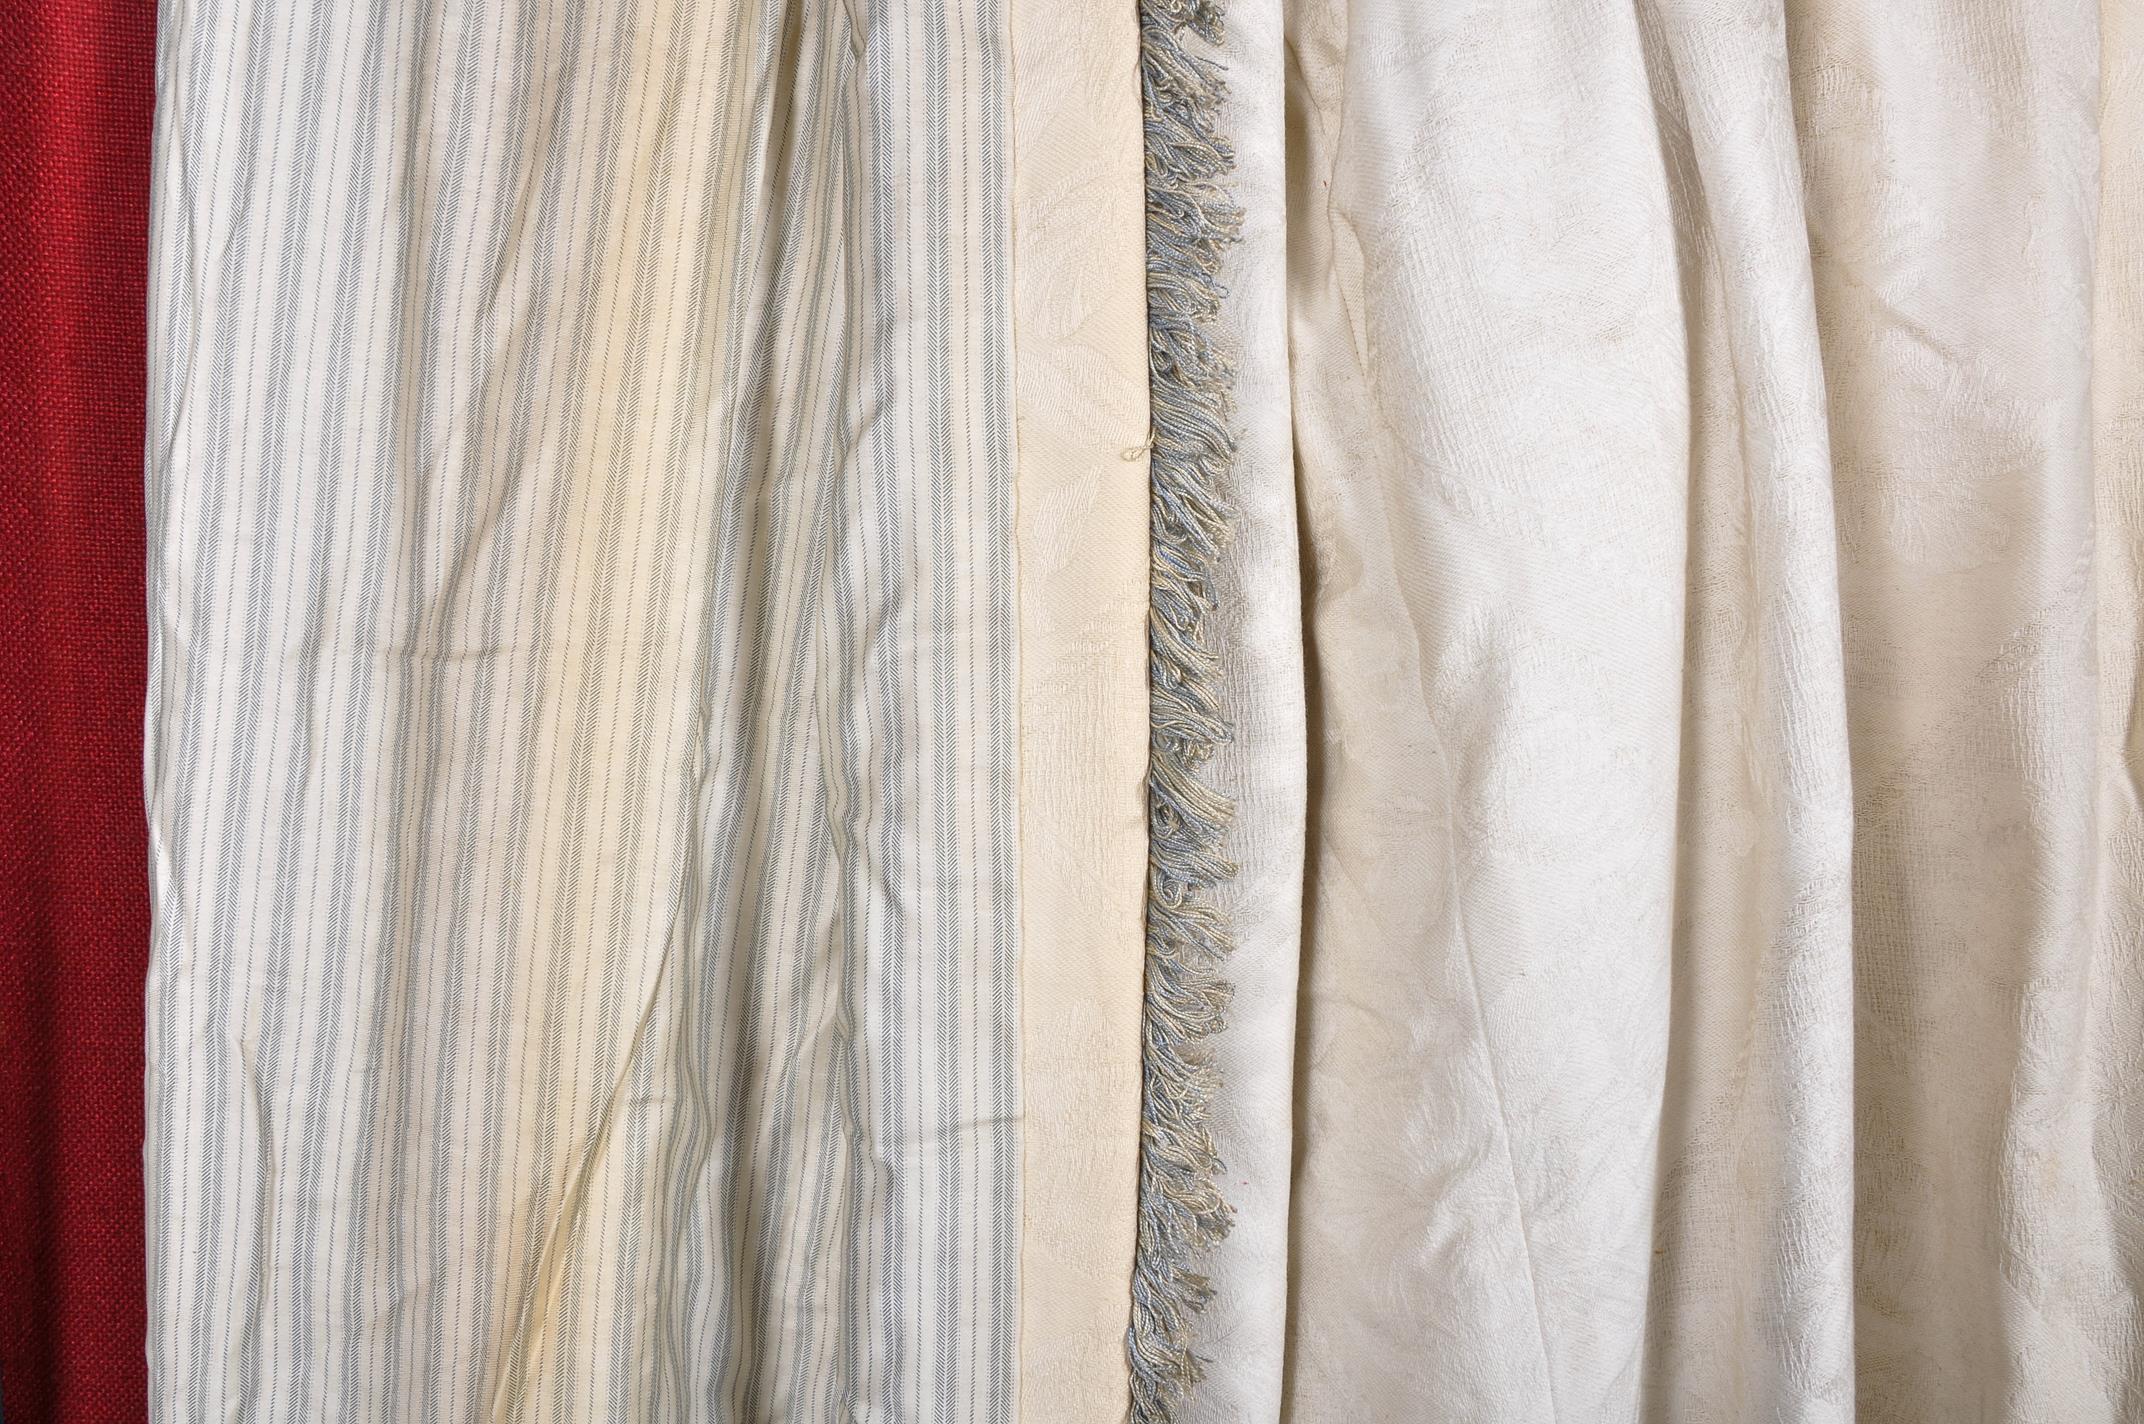 A pair of lined cream curtains